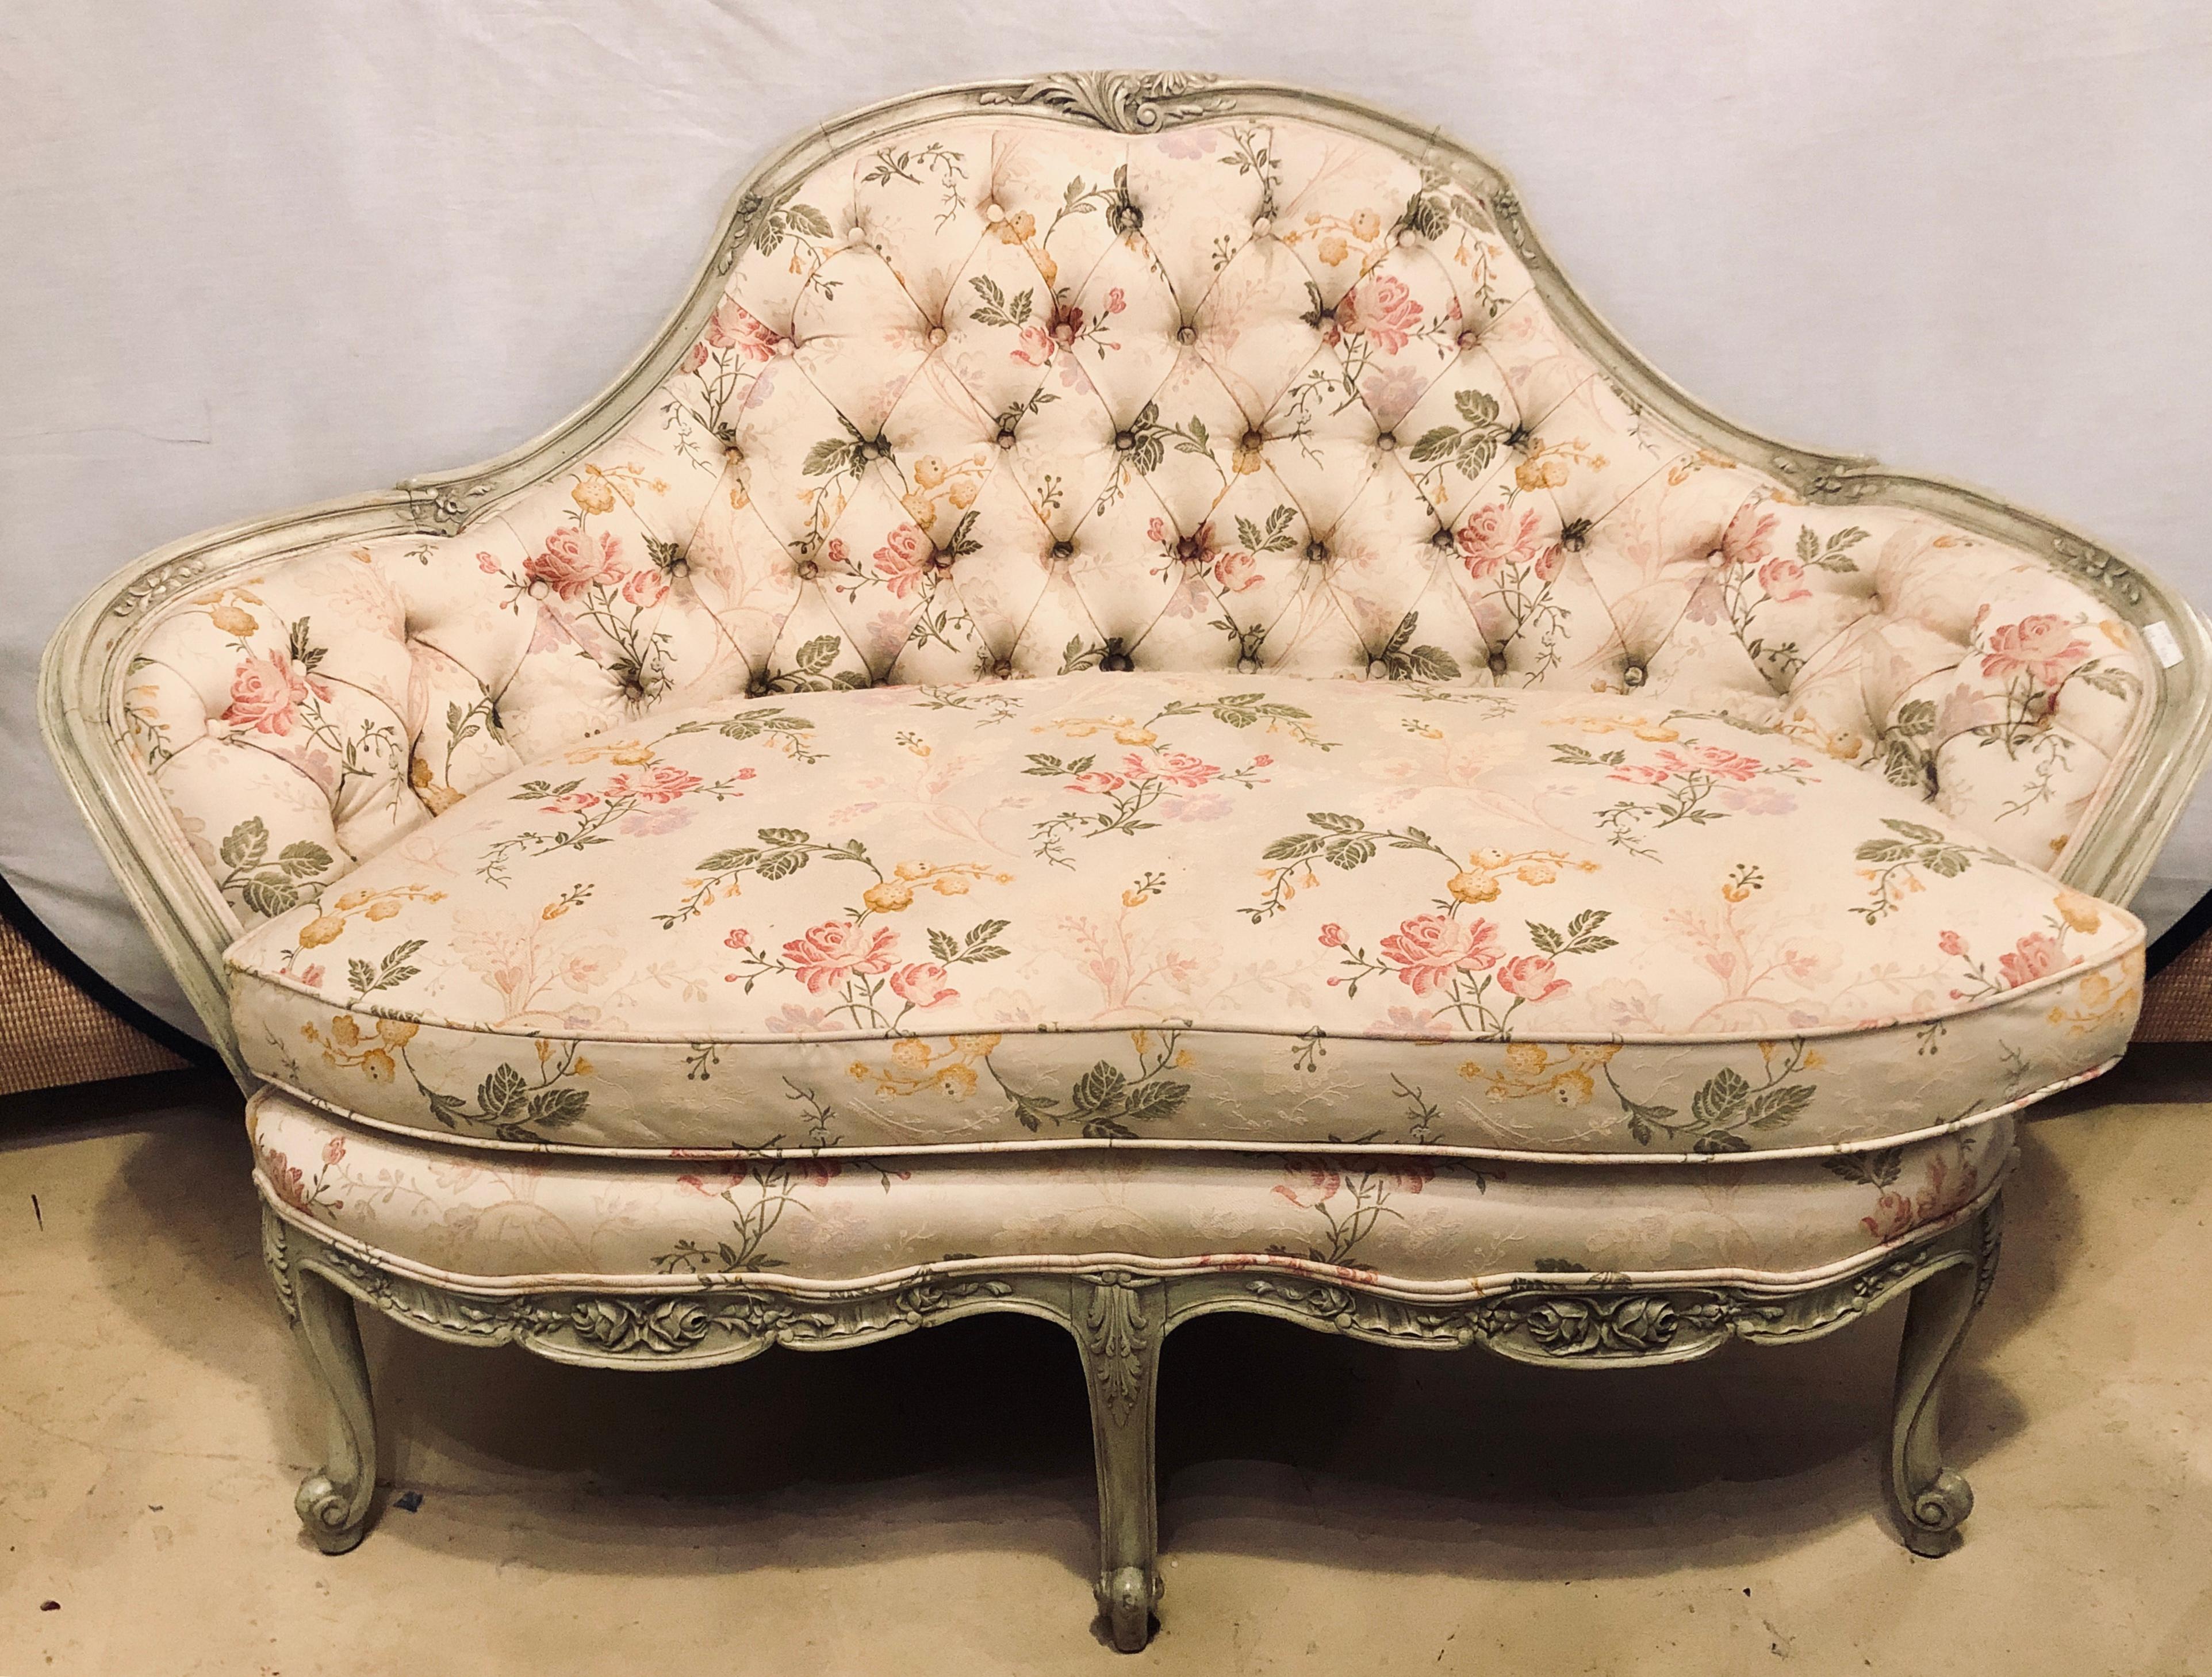 A French Louis XV style paint decorated settee tufted back with carved rosettes. A nicely carved settee or loveseat in the Swedish fashion.